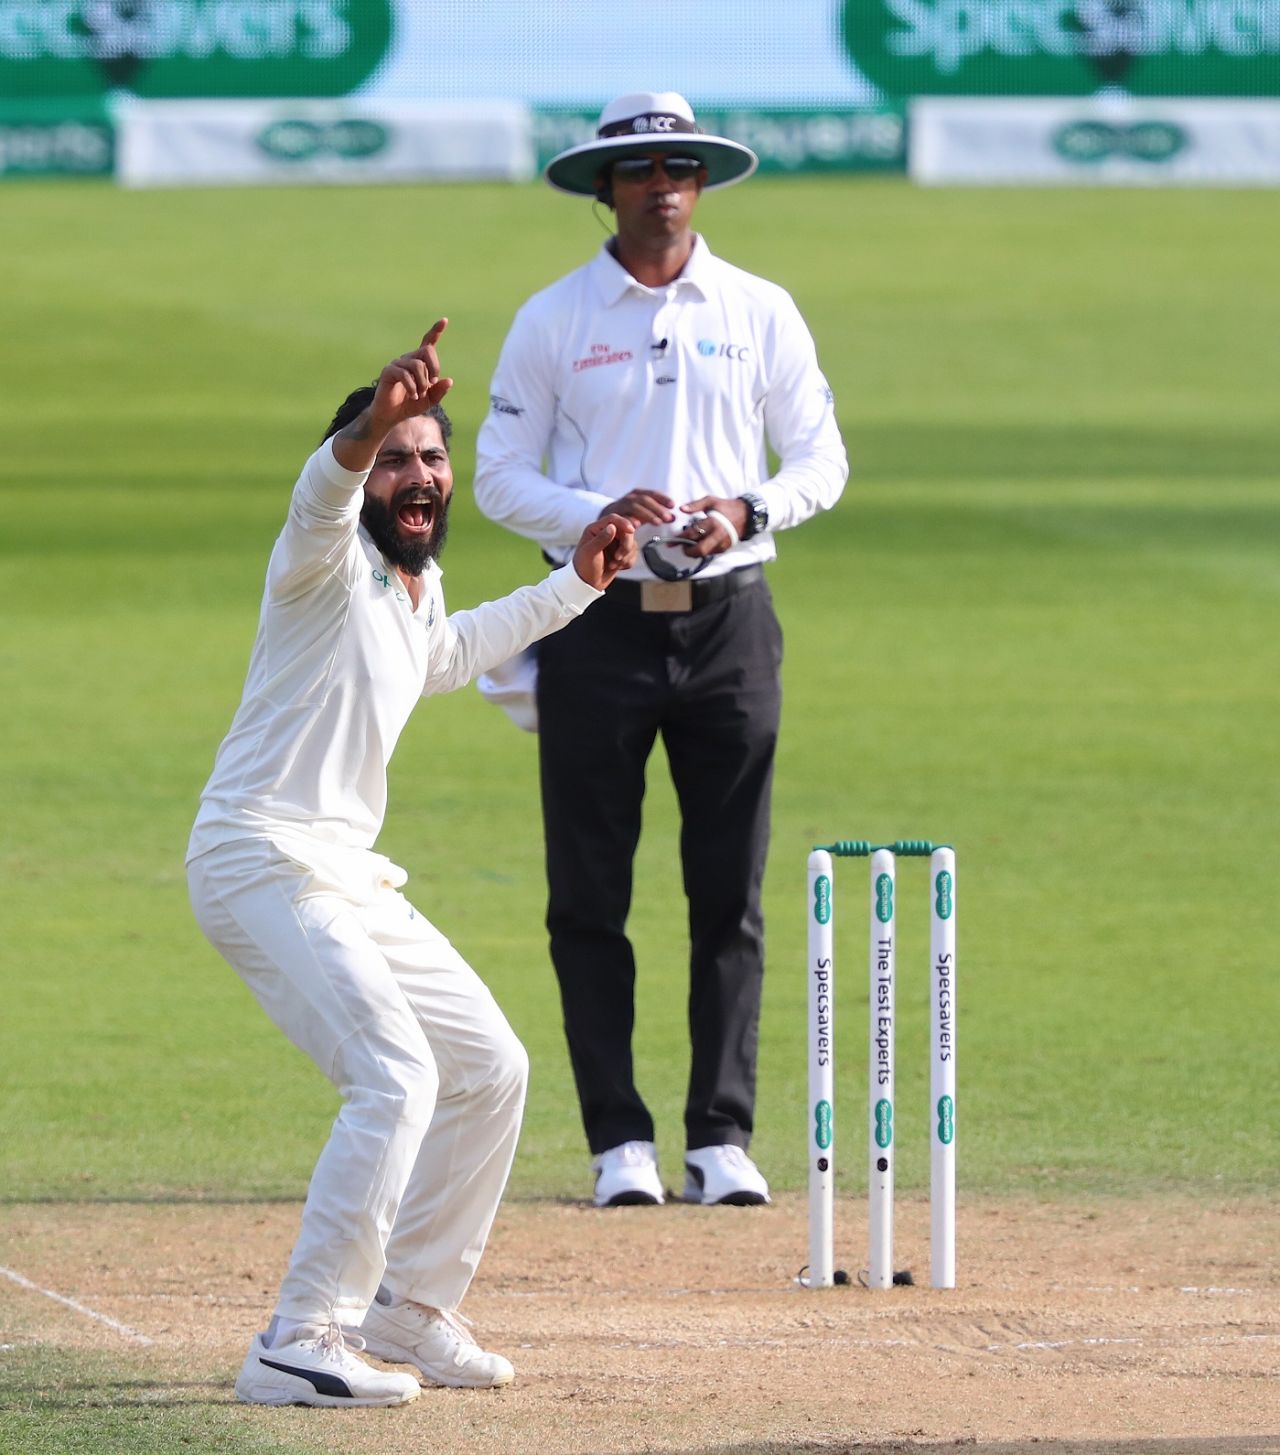 Ravindra Jadeja goes up in appeal, England v India, 5th Test, The Oval, 3rd day, September 9, 2018